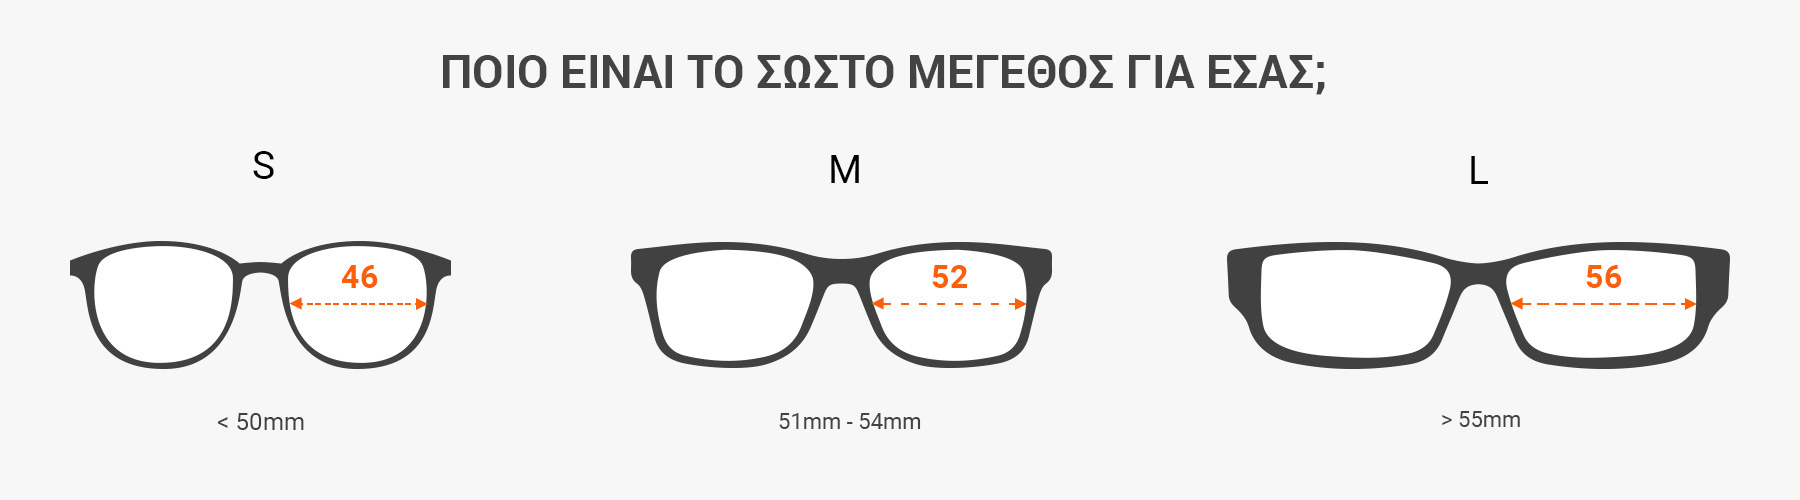 how to read sunglasses measurements - Measure sunglasses size with a ruler